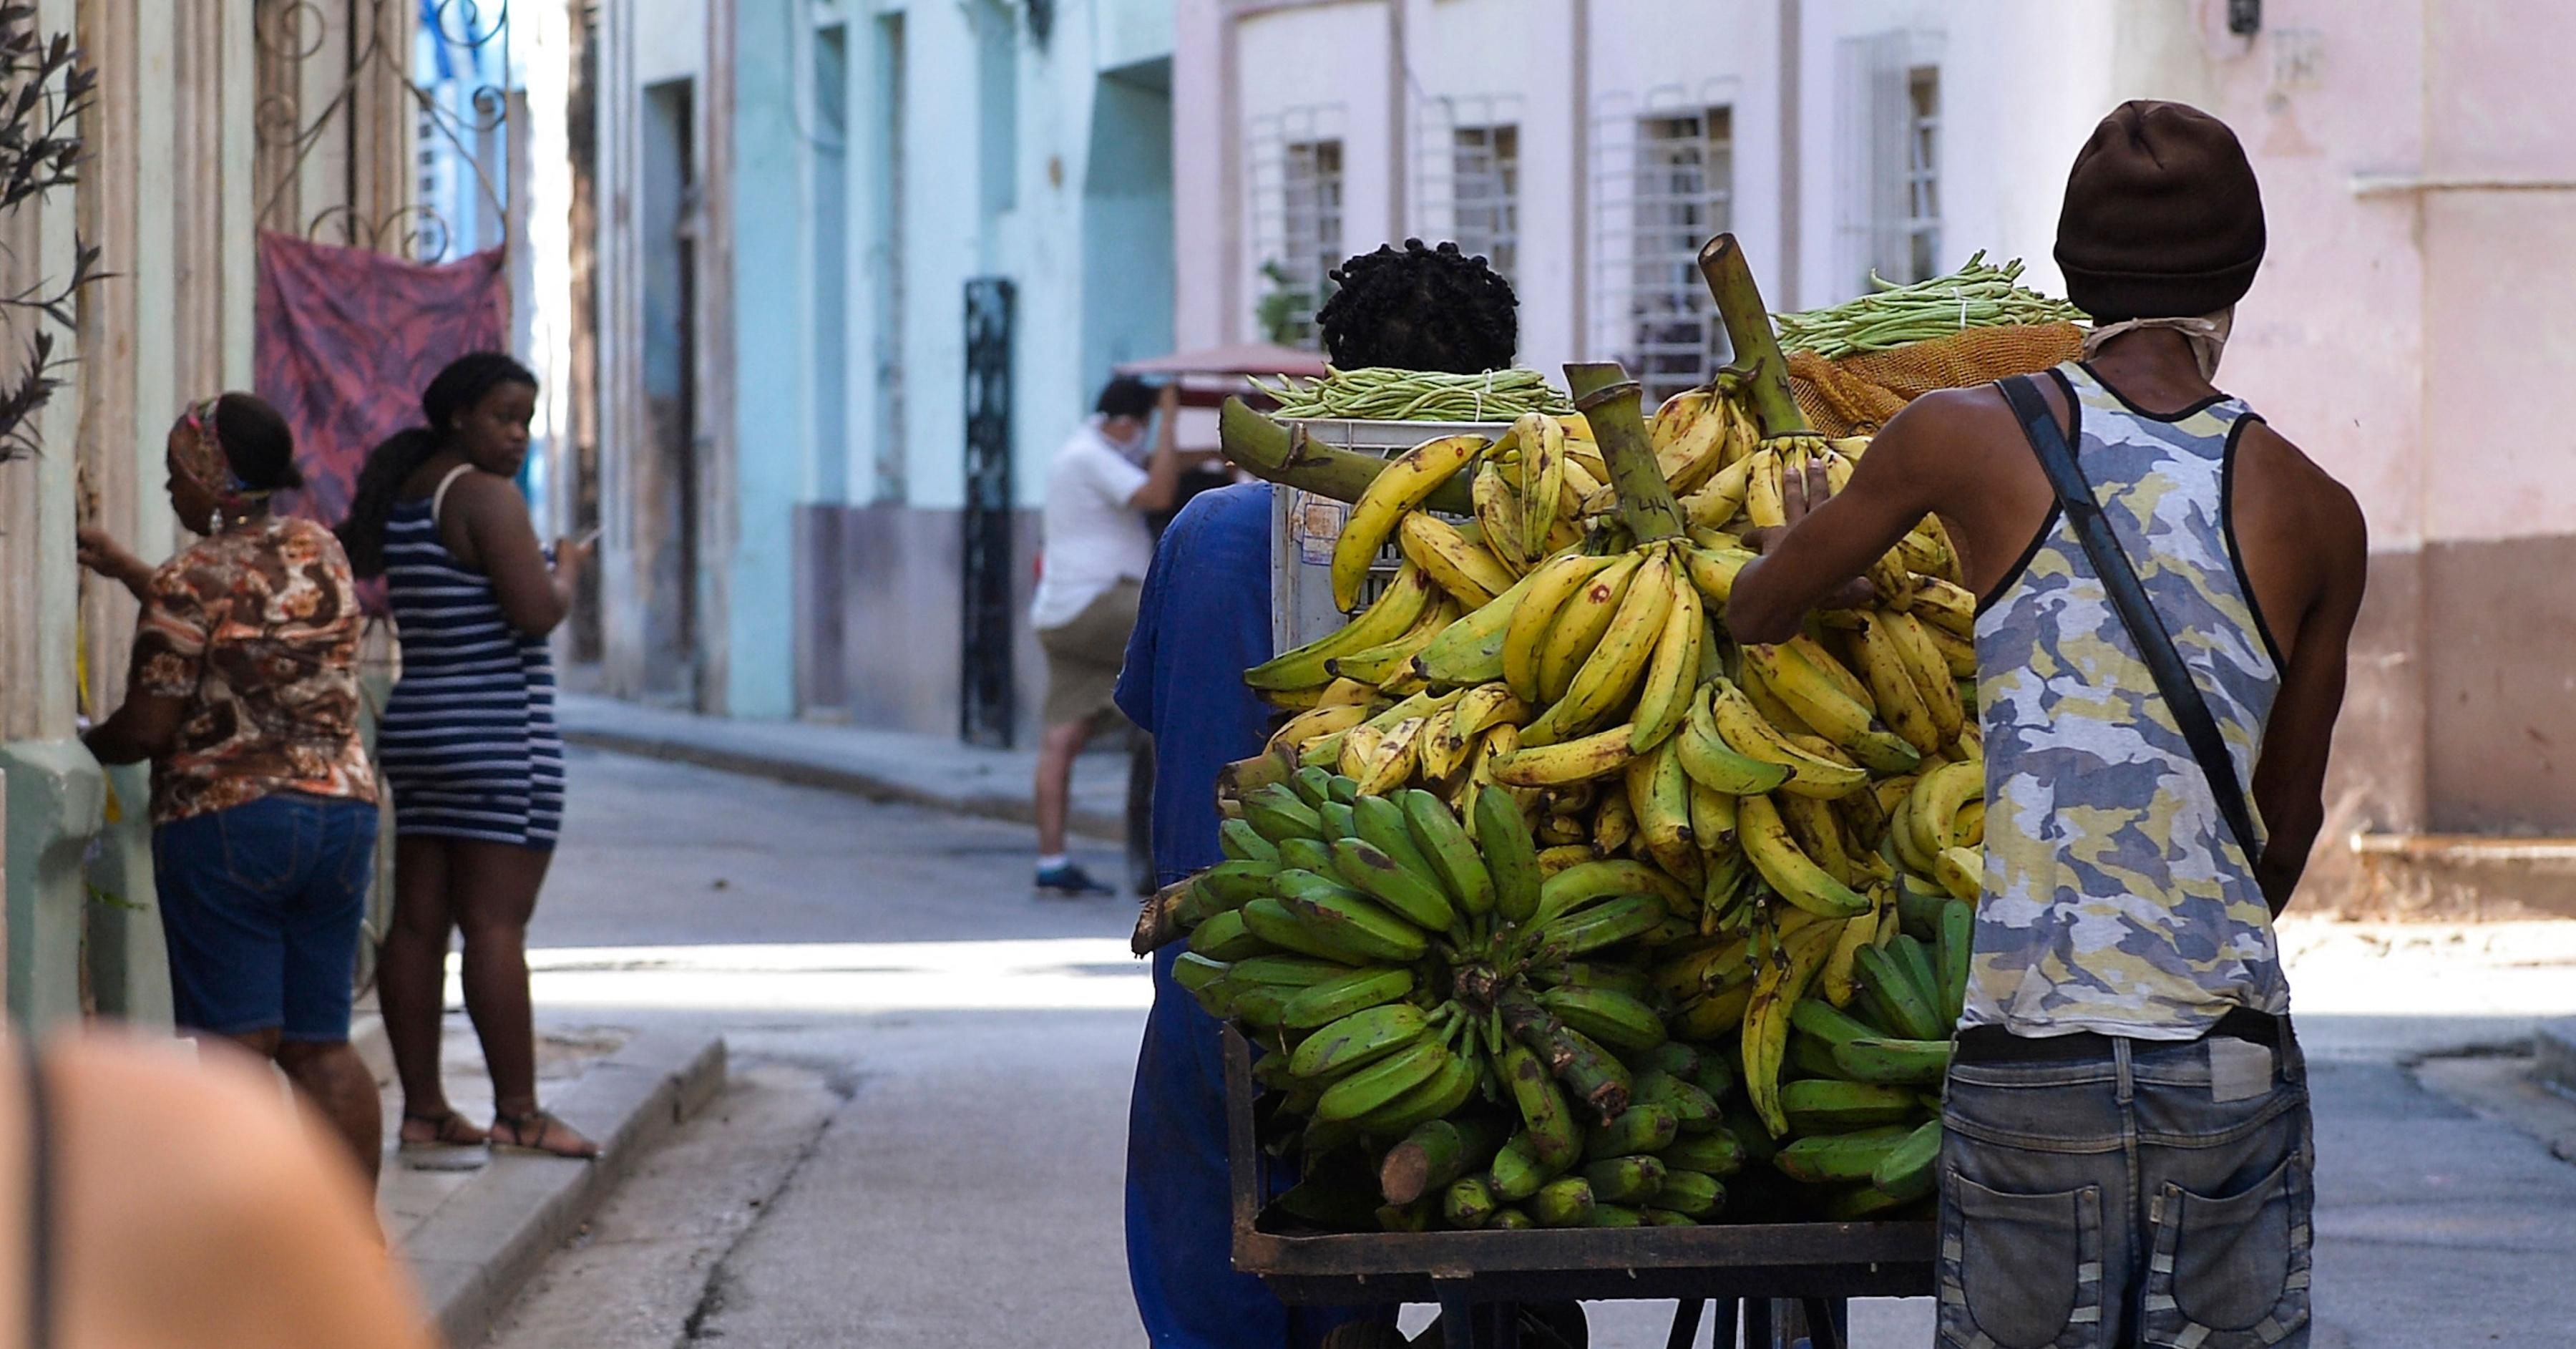 Men transport bananas for sale in Havana, on March 22, 2021. The Cuban economy is at its worst moment in almost 30 years, falling 11% in 2020, the biggest drop since 1993. (Photo: YAMIL LAGE/AFP via Getty Images)